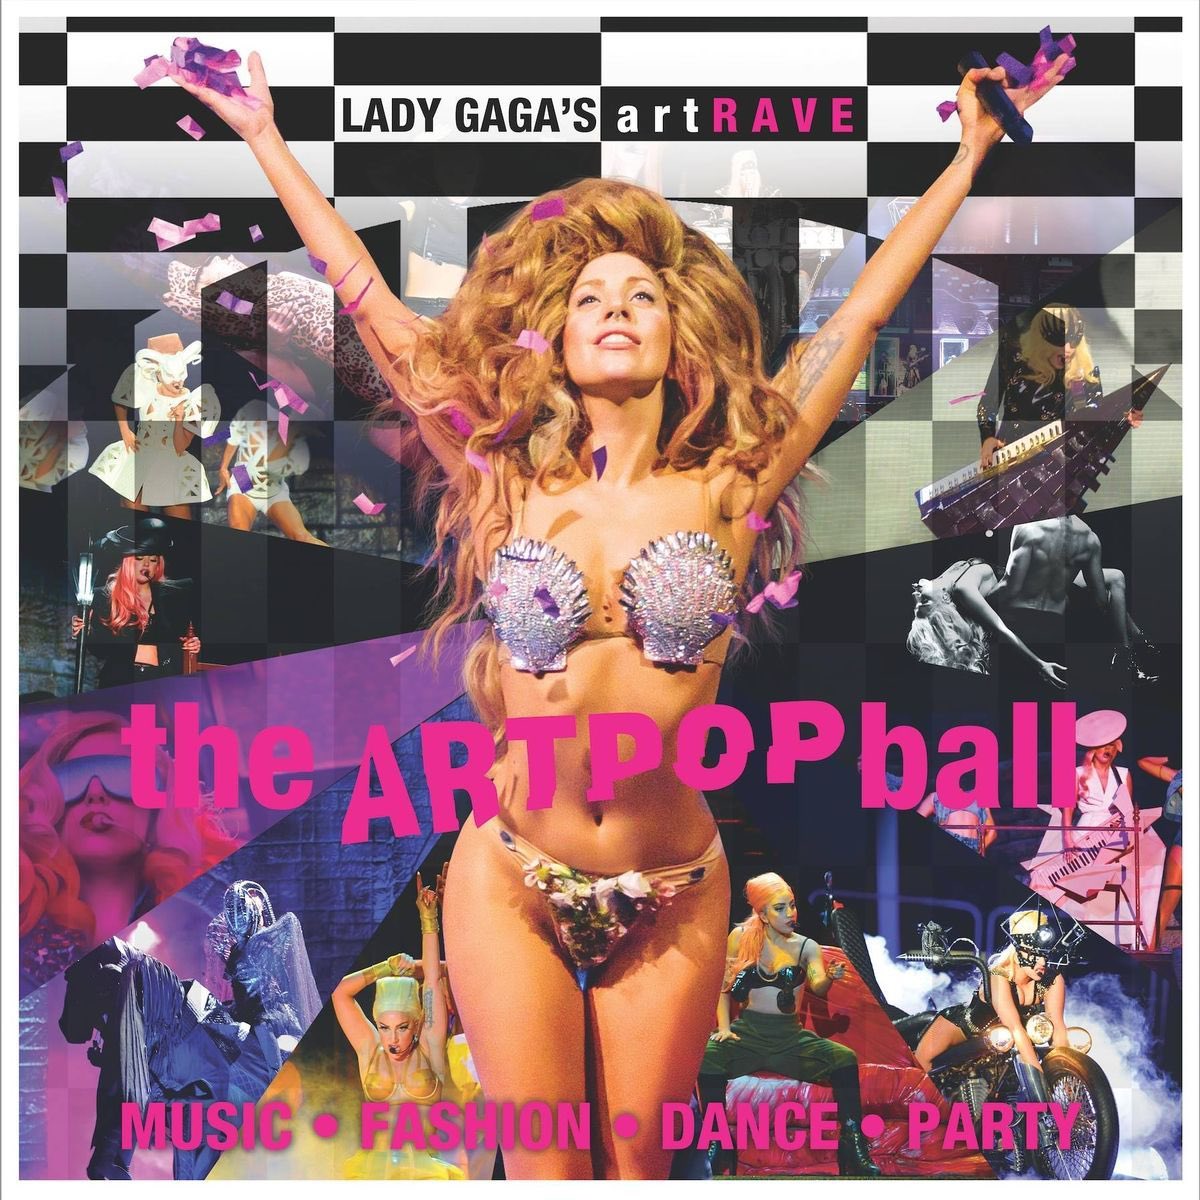 I can’t believe it’s already been 10 years of Lady Gaga’s artRAVE The ARTPOP Ball 🔵🩷